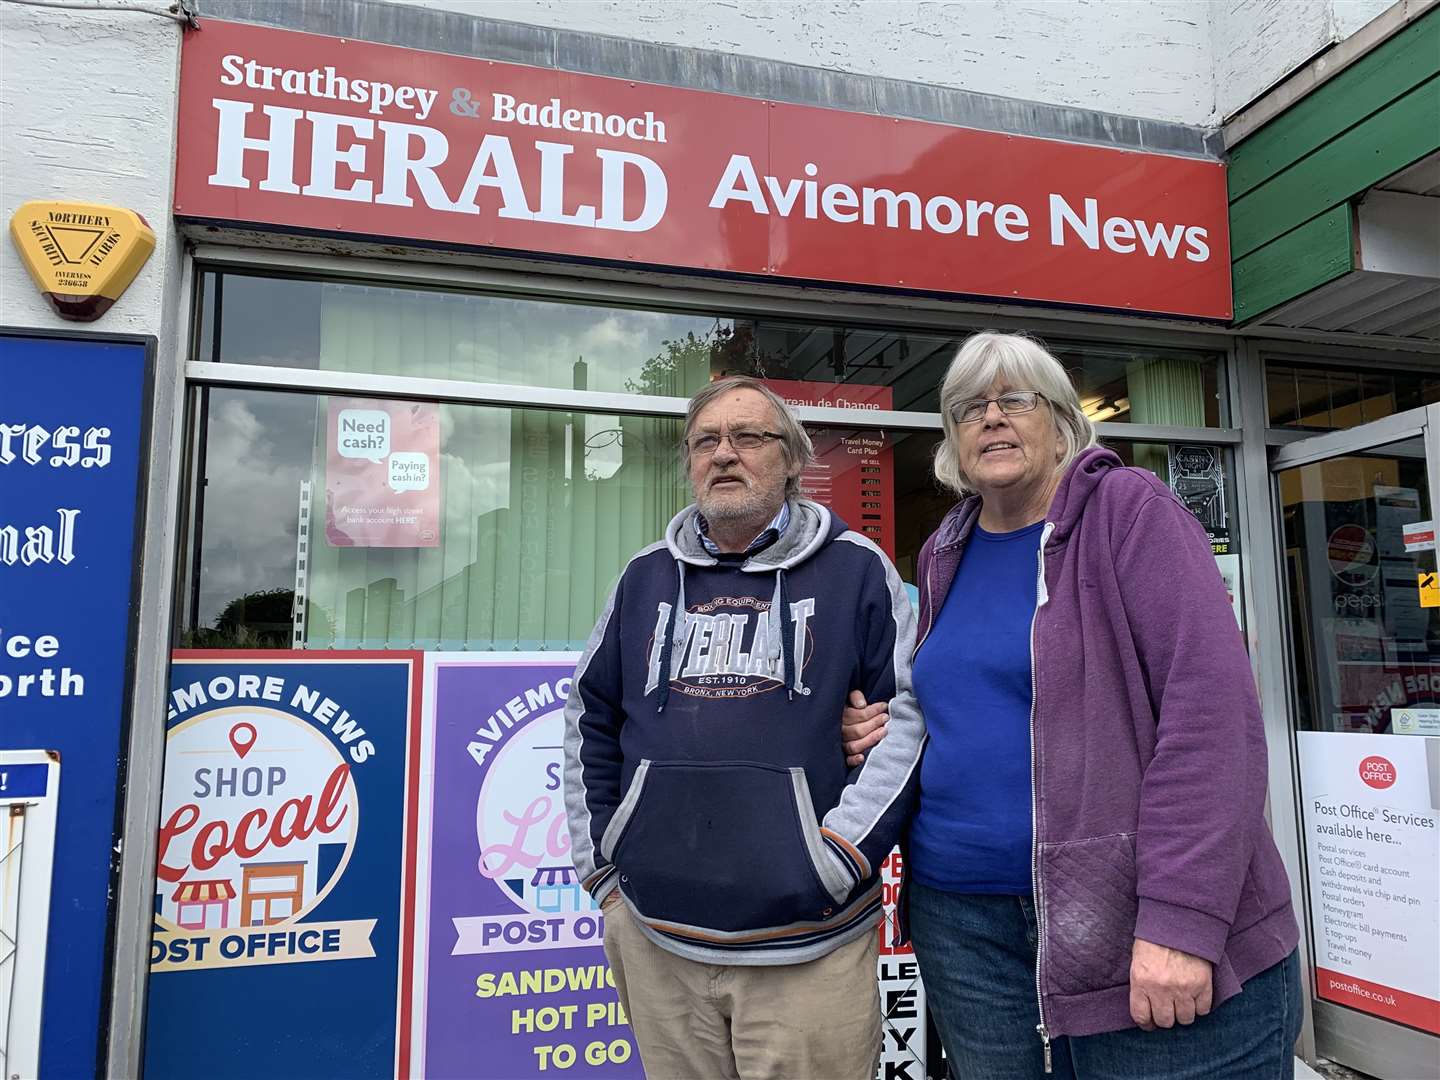 Ernest Kopp and Debra outside of Aviemore News and post office.